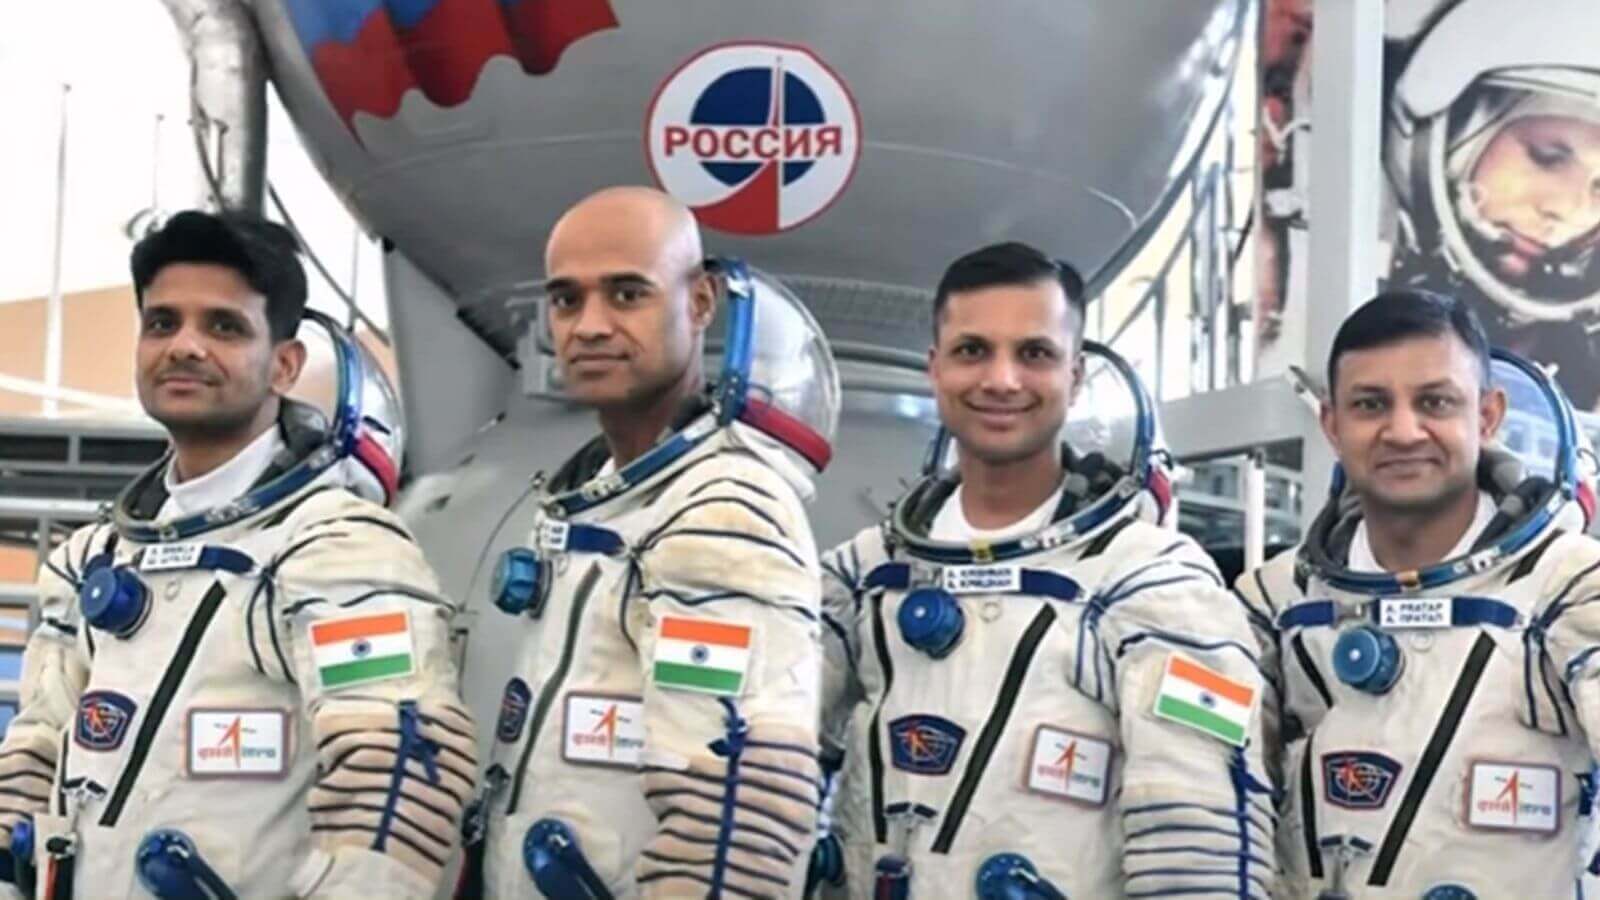 PM Modi Reveals Names of 4 Gangayaan Mission Astronauts to Carry “Aspirations of 140 Crore Indians into Space”